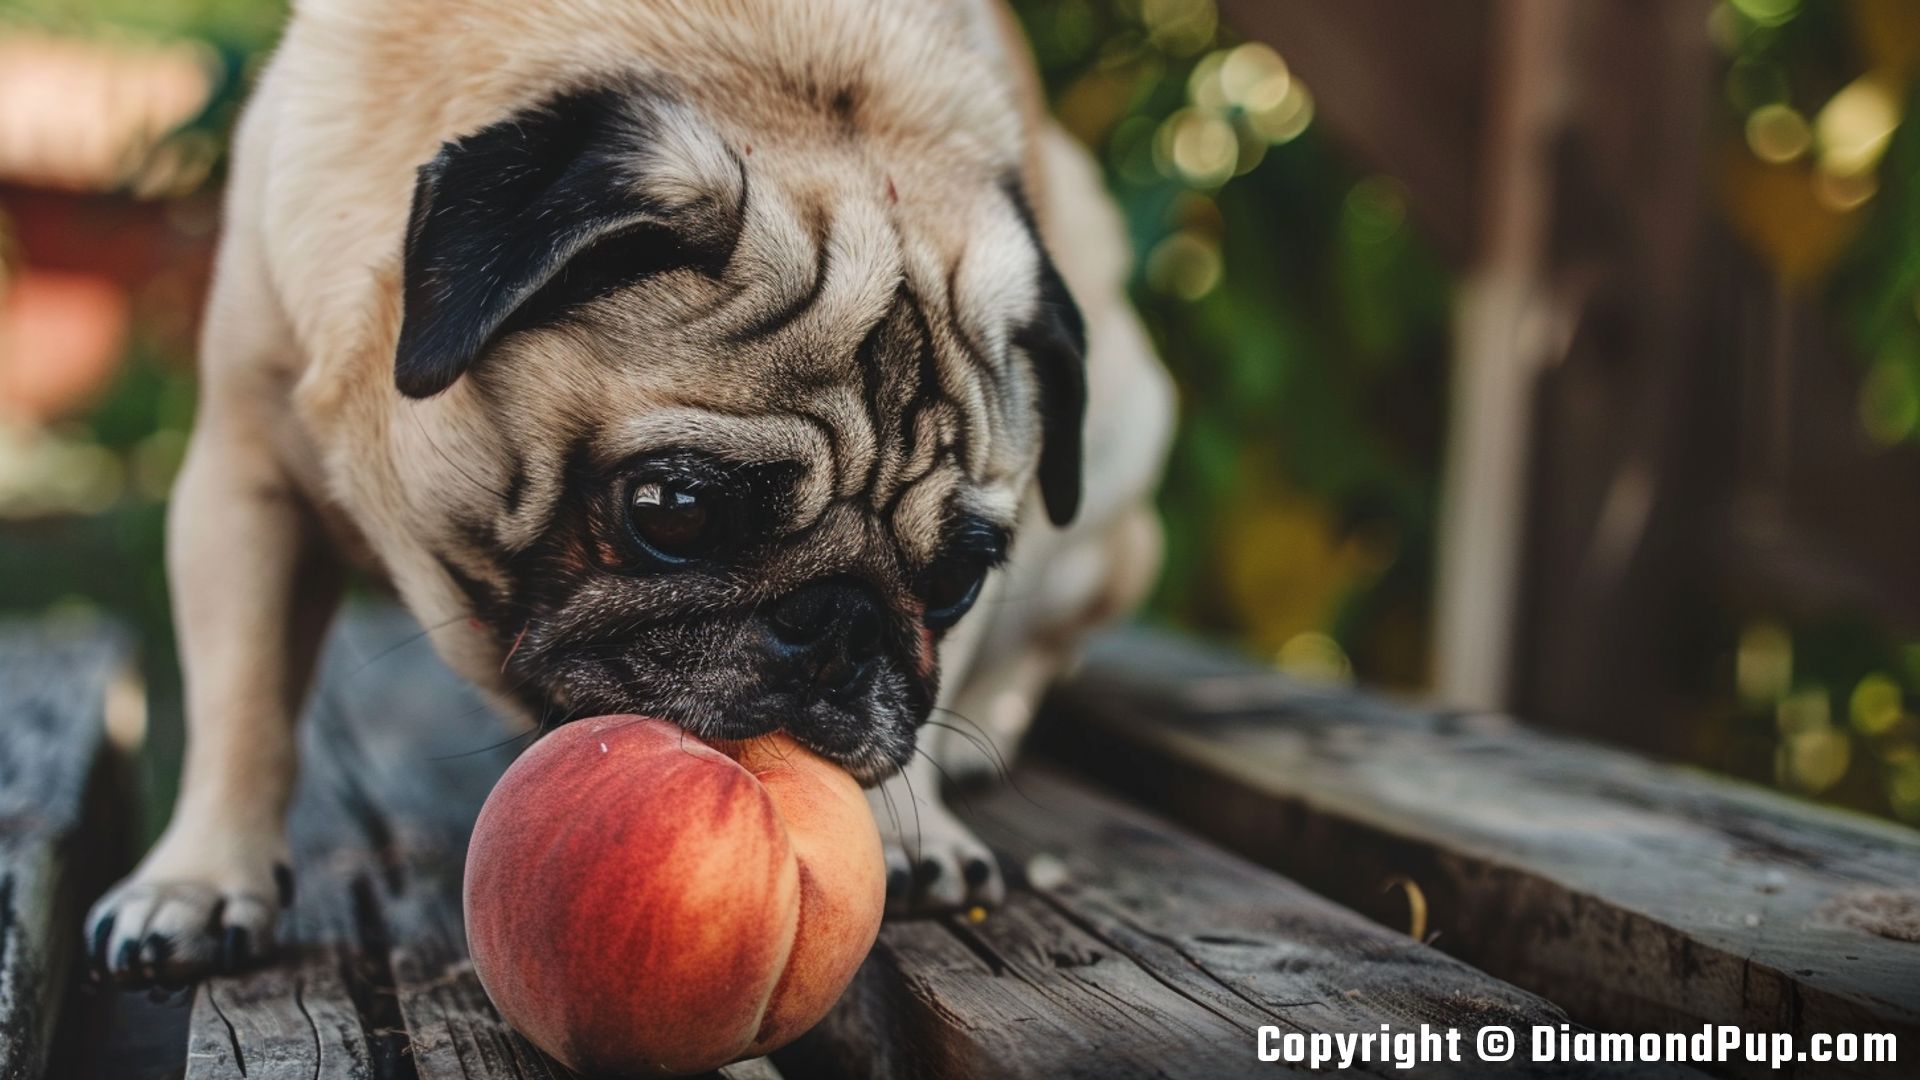 Image of a Playful Pug Eating Peaches